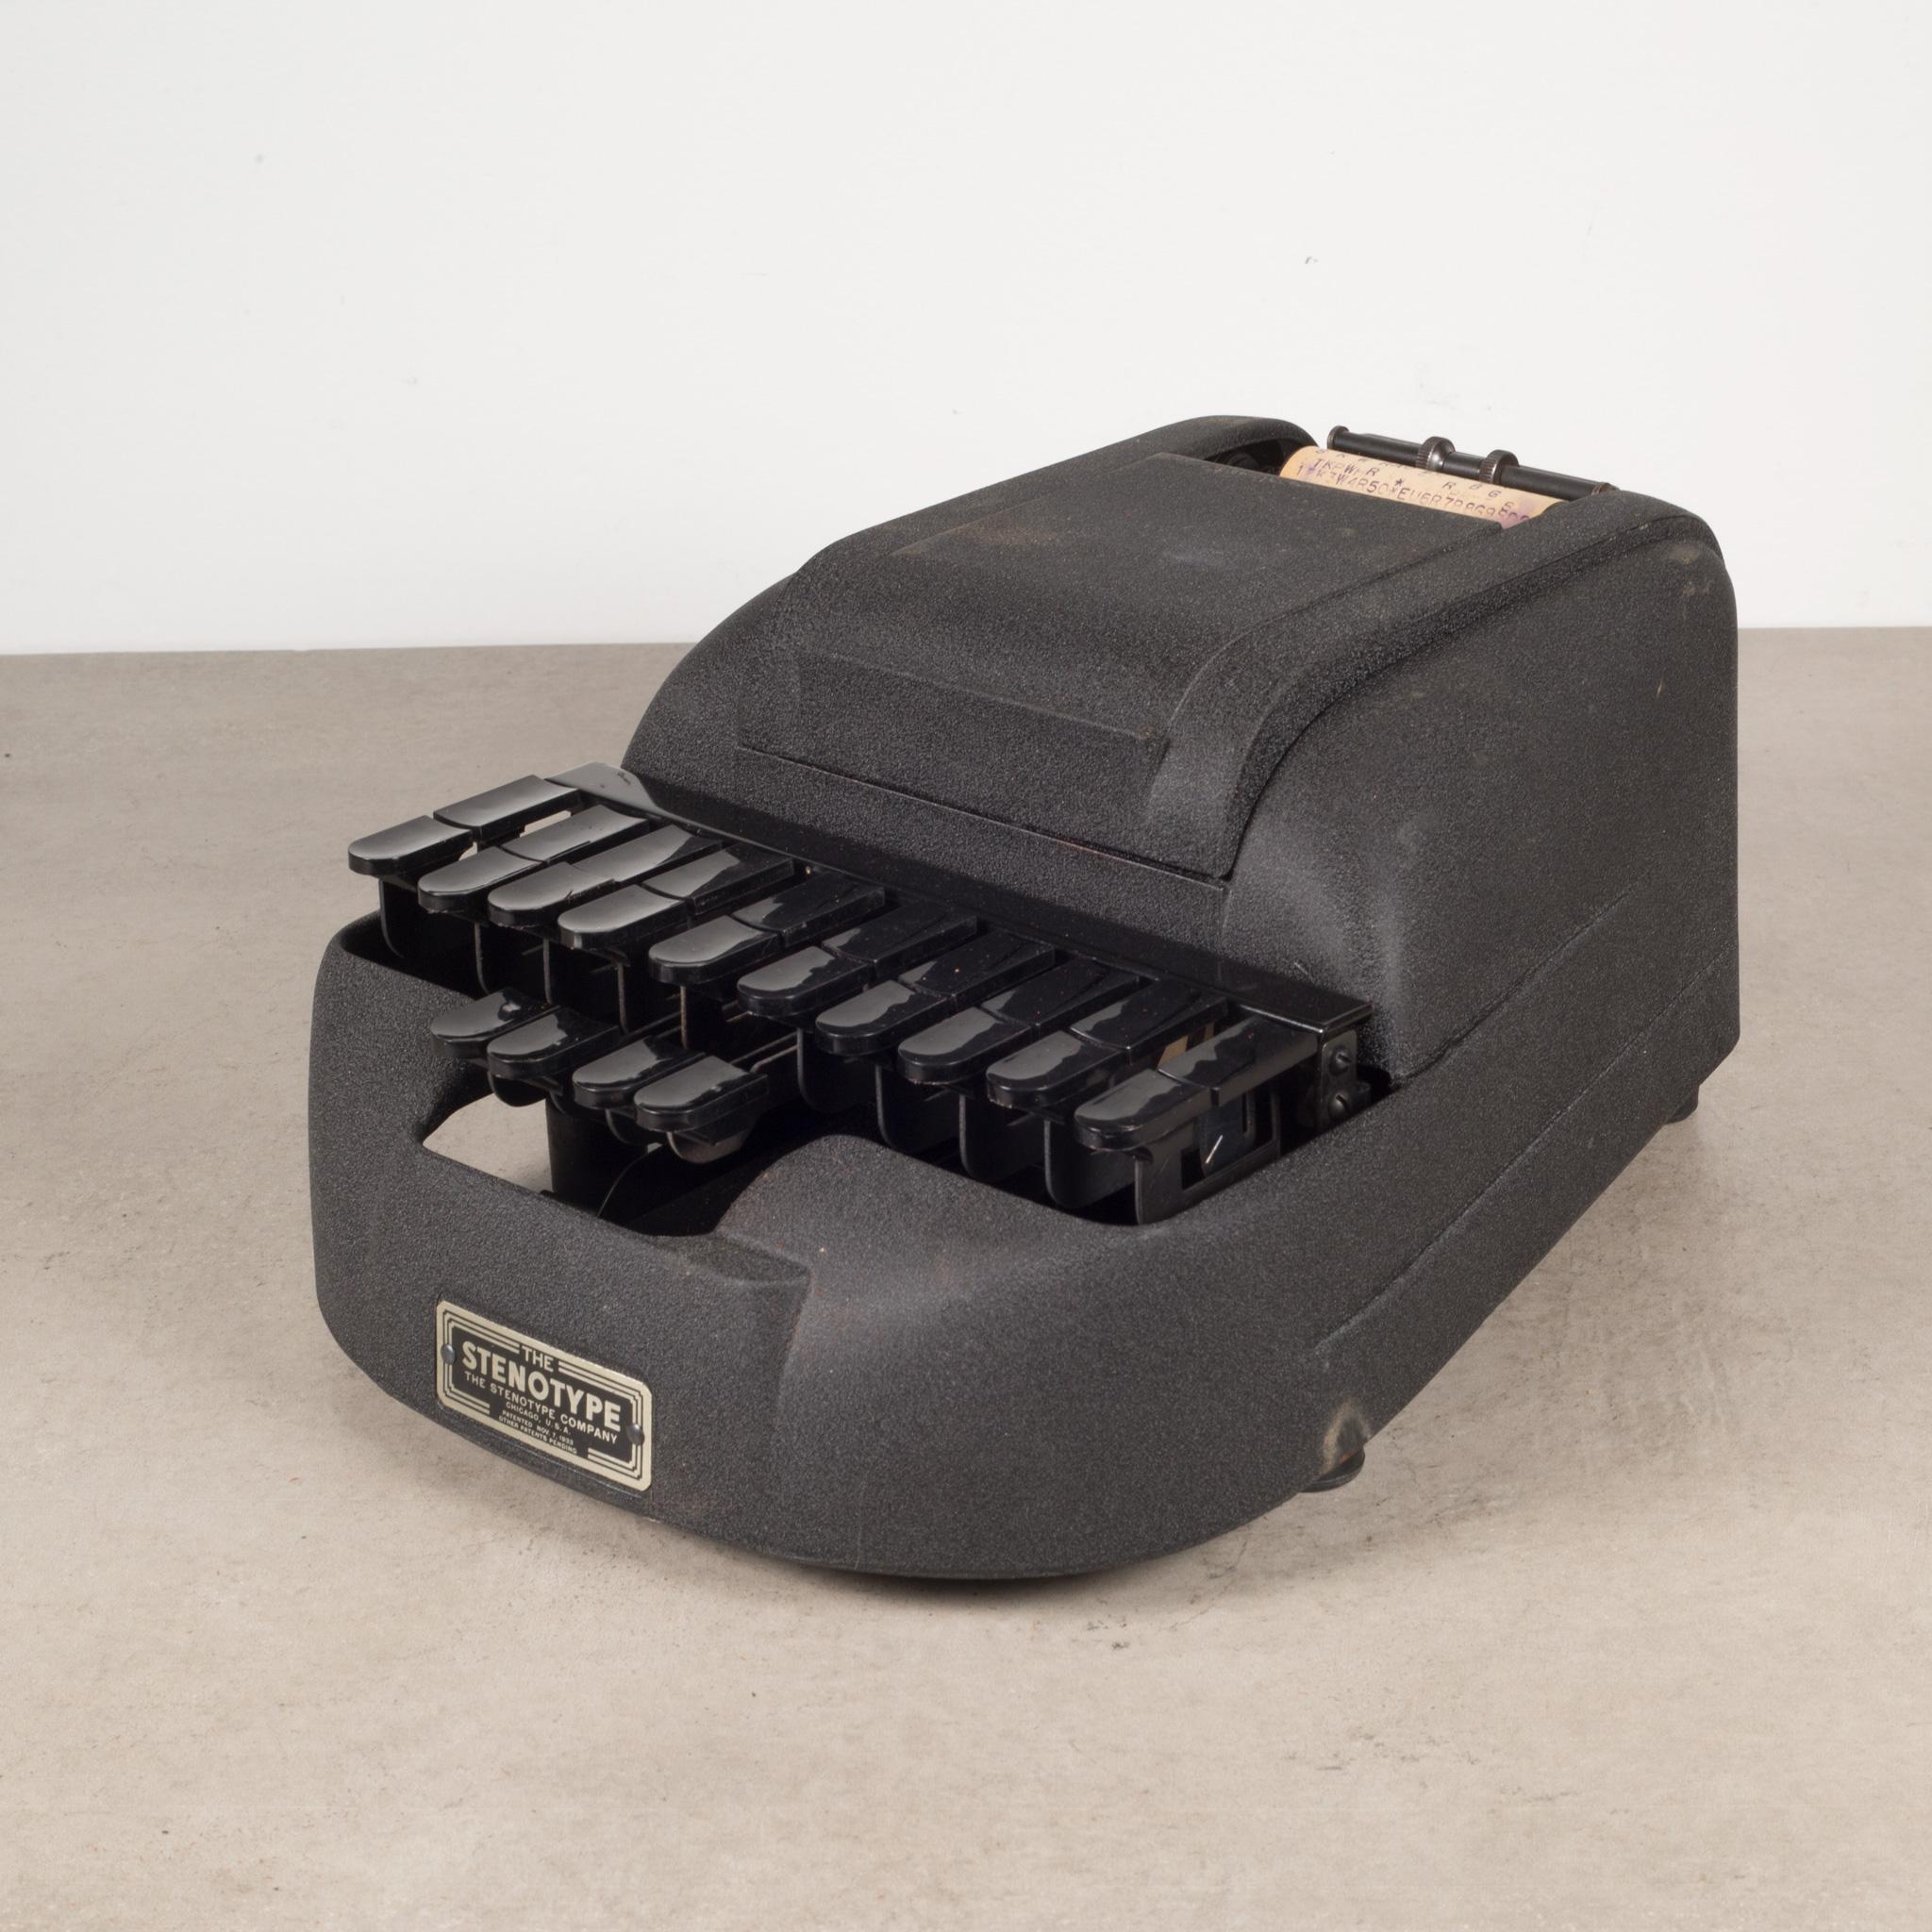 Industrial Antique Art Deco Stenograph with Original Case c.1920-1930 (FREE SHIPPING) For Sale